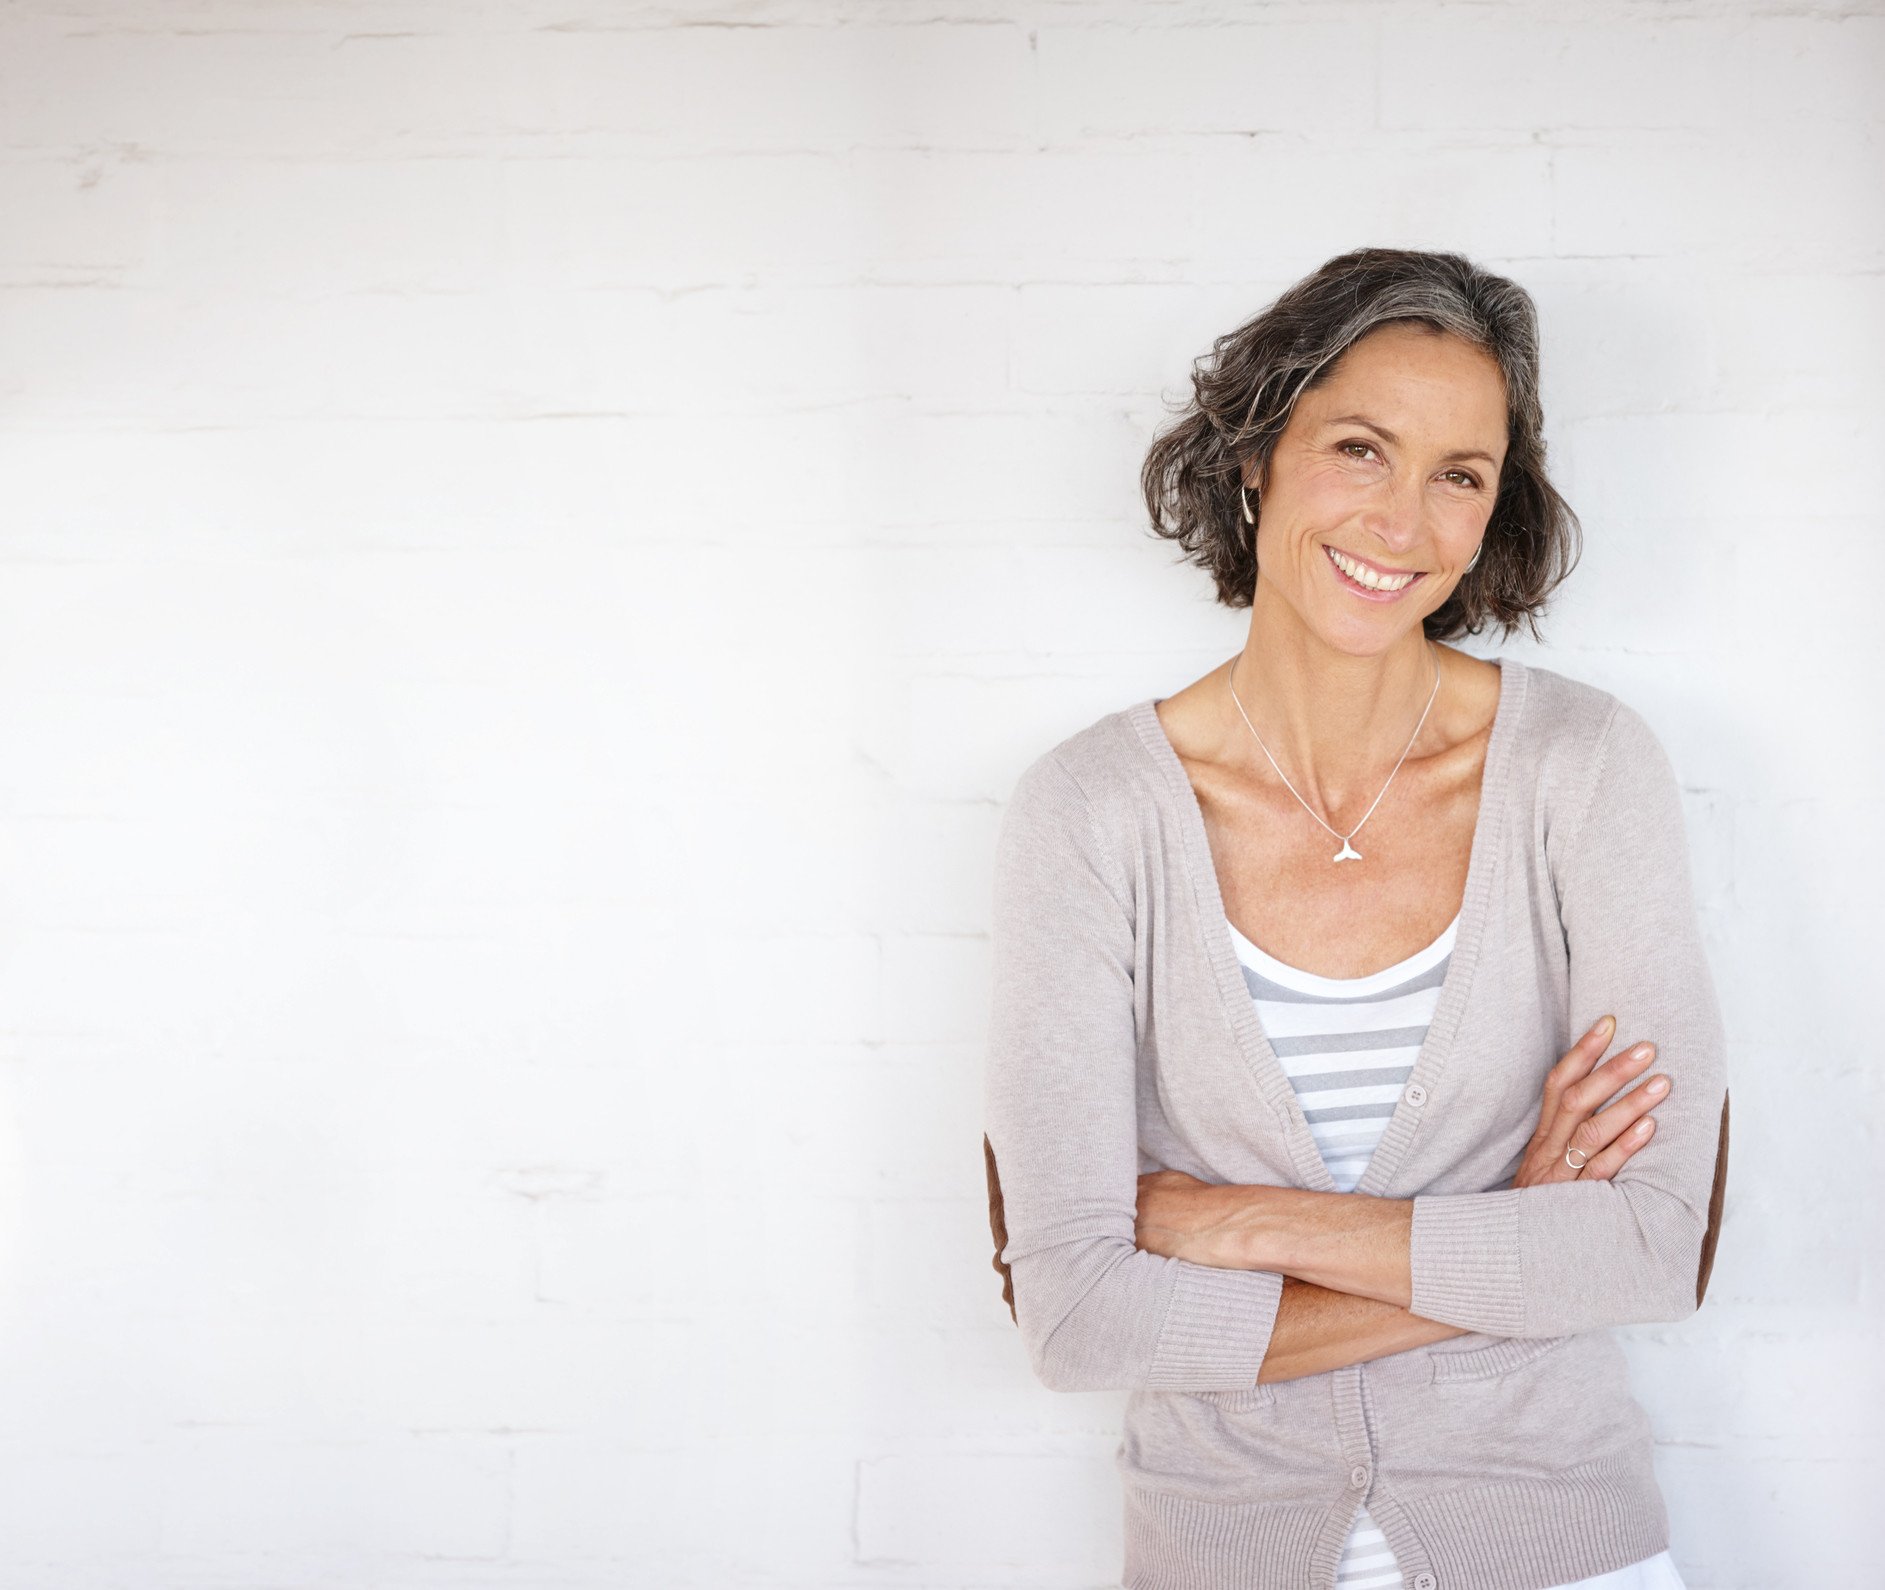 Portrait of a mature woman smiling, while standing against a wall.